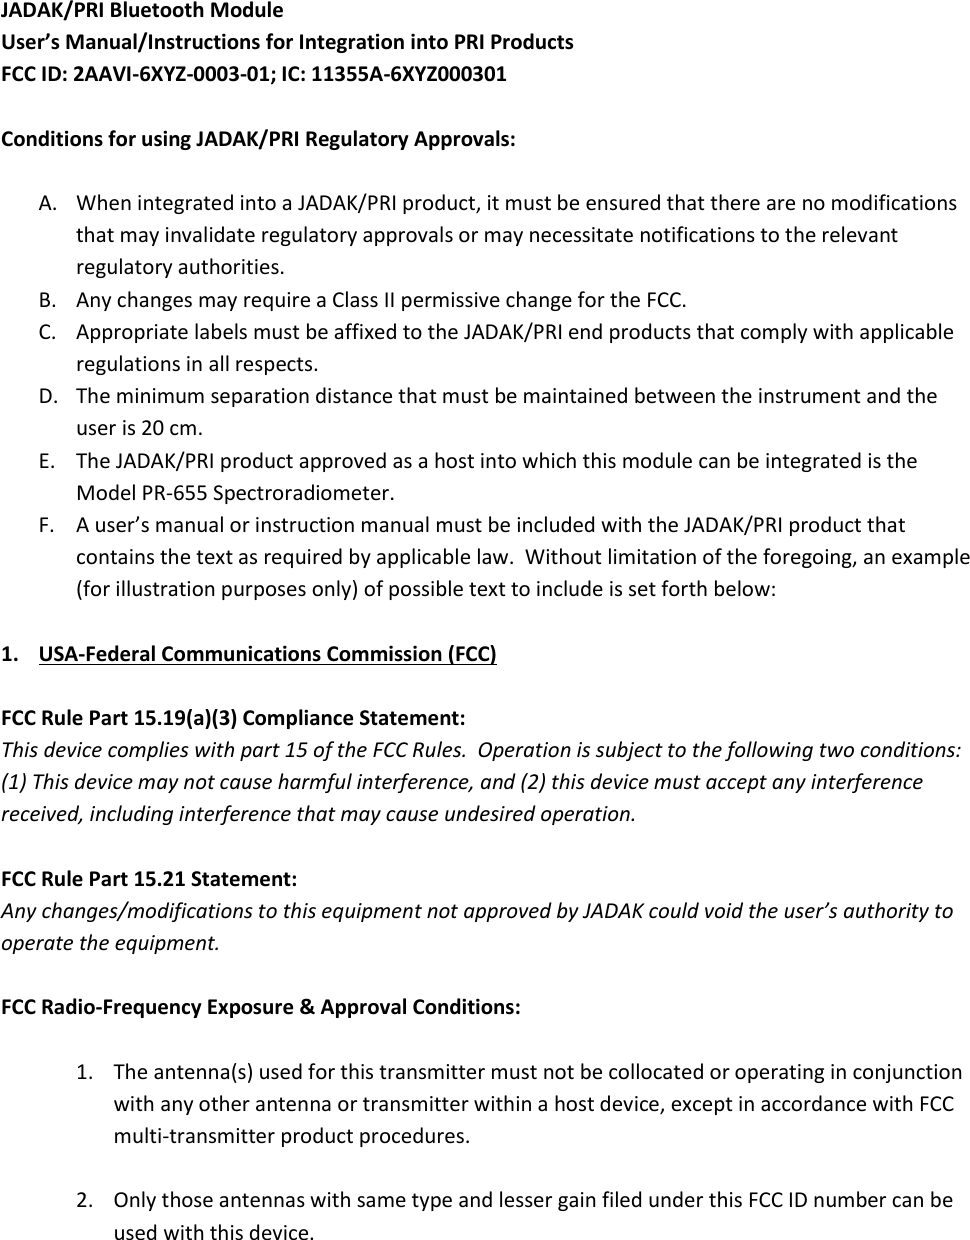 JADAK/PRI Bluetooth Module User’s Manual/Instructions for Integration into PRI Products FCC ID: 2AAVI-6XYZ-0003-01; IC: 11355A-6XYZ000301  Conditions for using JADAK/PRI Regulatory Approvals:  A. When integrated into a JADAK/PRI product, it must be ensured that there are no modifications that may invalidate regulatory approvals or may necessitate notifications to the relevant regulatory authorities. B. Any changes may require a Class II permissive change for the FCC. C. Appropriate labels must be affixed to the JADAK/PRI end products that comply with applicable regulations in all respects. D. The minimum separation distance that must be maintained between the instrument and the user is 20 cm. E. The JADAK/PRI product approved as a host into which this module can be integrated is the Model PR-655 Spectroradiometer. F. A user’s manual or instruction manual must be included with the JADAK/PRI product that contains the text as required by applicable law.  Without limitation of the foregoing, an example (for illustration purposes only) of possible text to include is set forth below:  1. USA-Federal Communications Commission (FCC)  FCC Rule Part 15.19(a)(3) Compliance Statement: This device complies with part 15 of the FCC Rules.  Operation is subject to the following two conditions: (1) This device may not cause harmful interference, and (2) this device must accept any interference received, including interference that may cause undesired operation.  FCC Rule Part 15.21 Statement: Any changes/modifications to this equipment not approved by JADAK could void the user’s authority to operate the equipment.  FCC Radio-Frequency Exposure &amp; Approval Conditions:   1. The antenna(s) used for this transmitter must not be collocated or operating in conjunction with any other antenna or transmitter within a host device, except in accordance with FCC multi-transmitter product procedures.  2. Only those antennas with same type and lesser gain filed under this FCC ID number can be used with this device.   